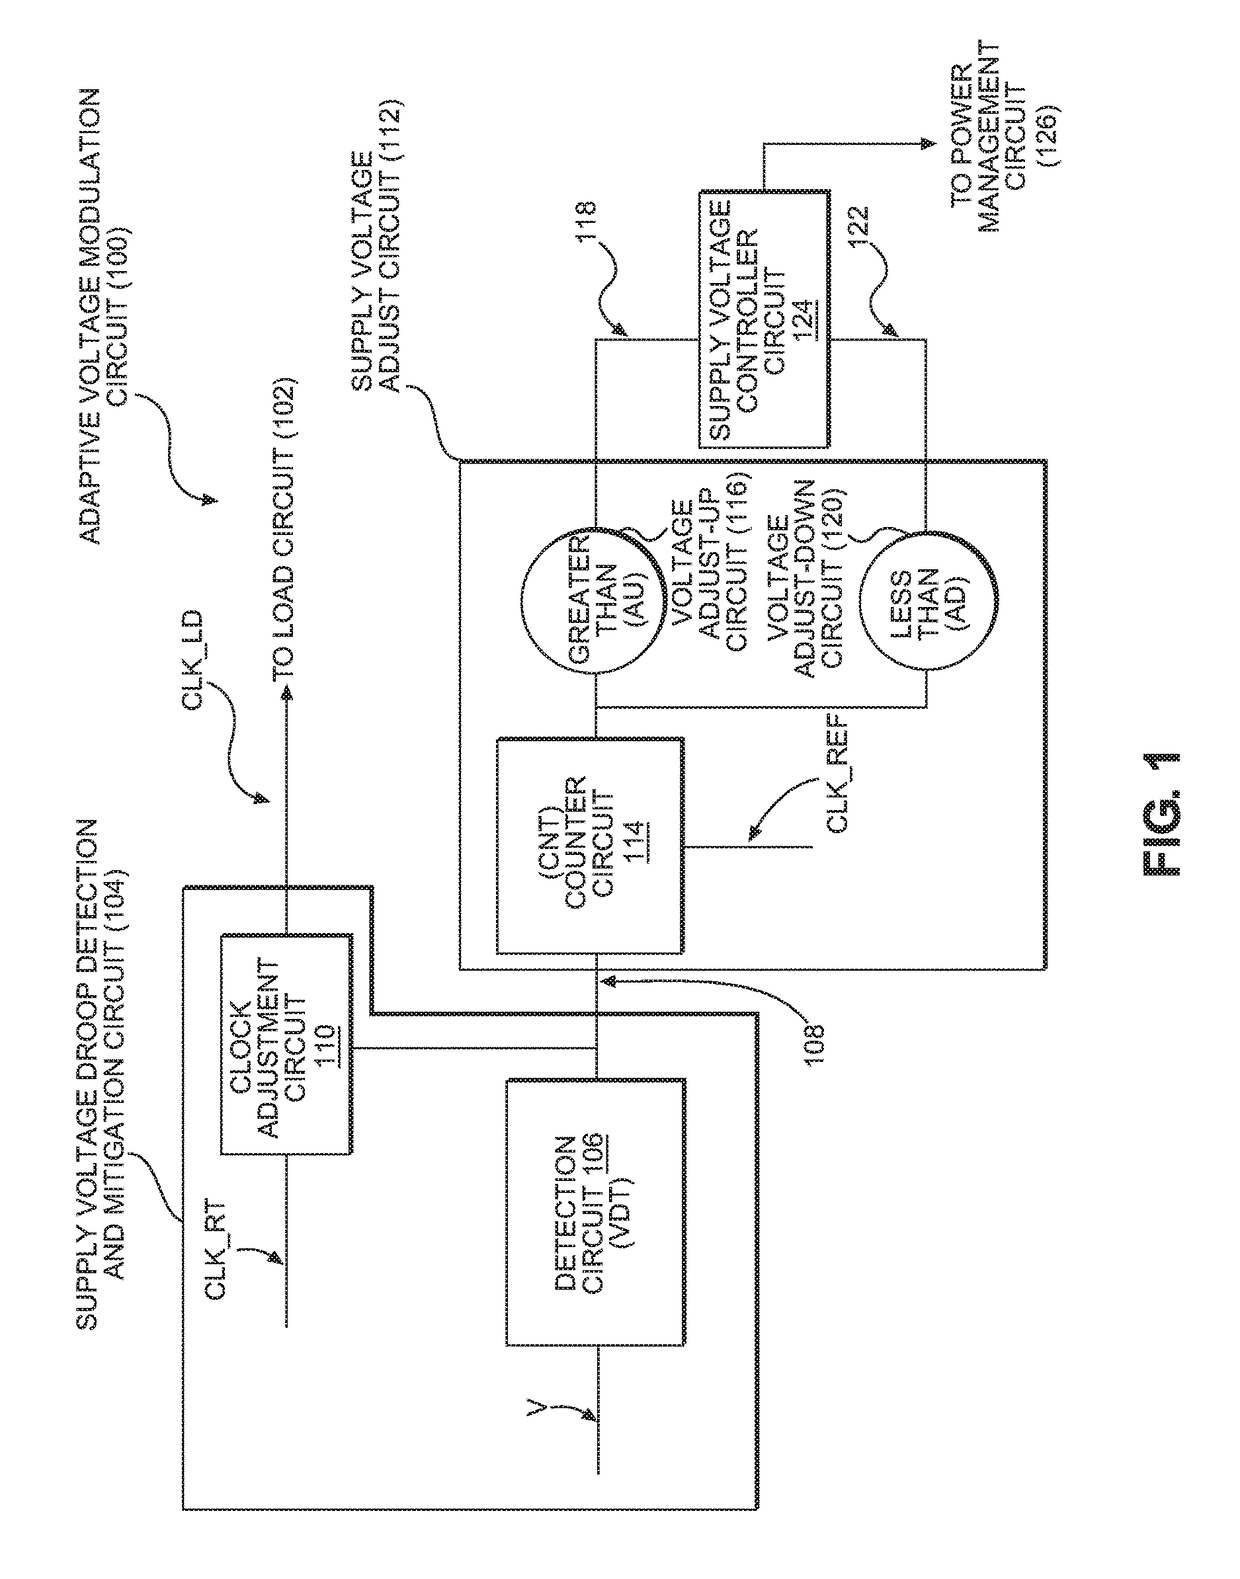 Adaptive voltage modulation circuits for adjusting supply voltage to reduce supply voltage droops and minimize power consumption